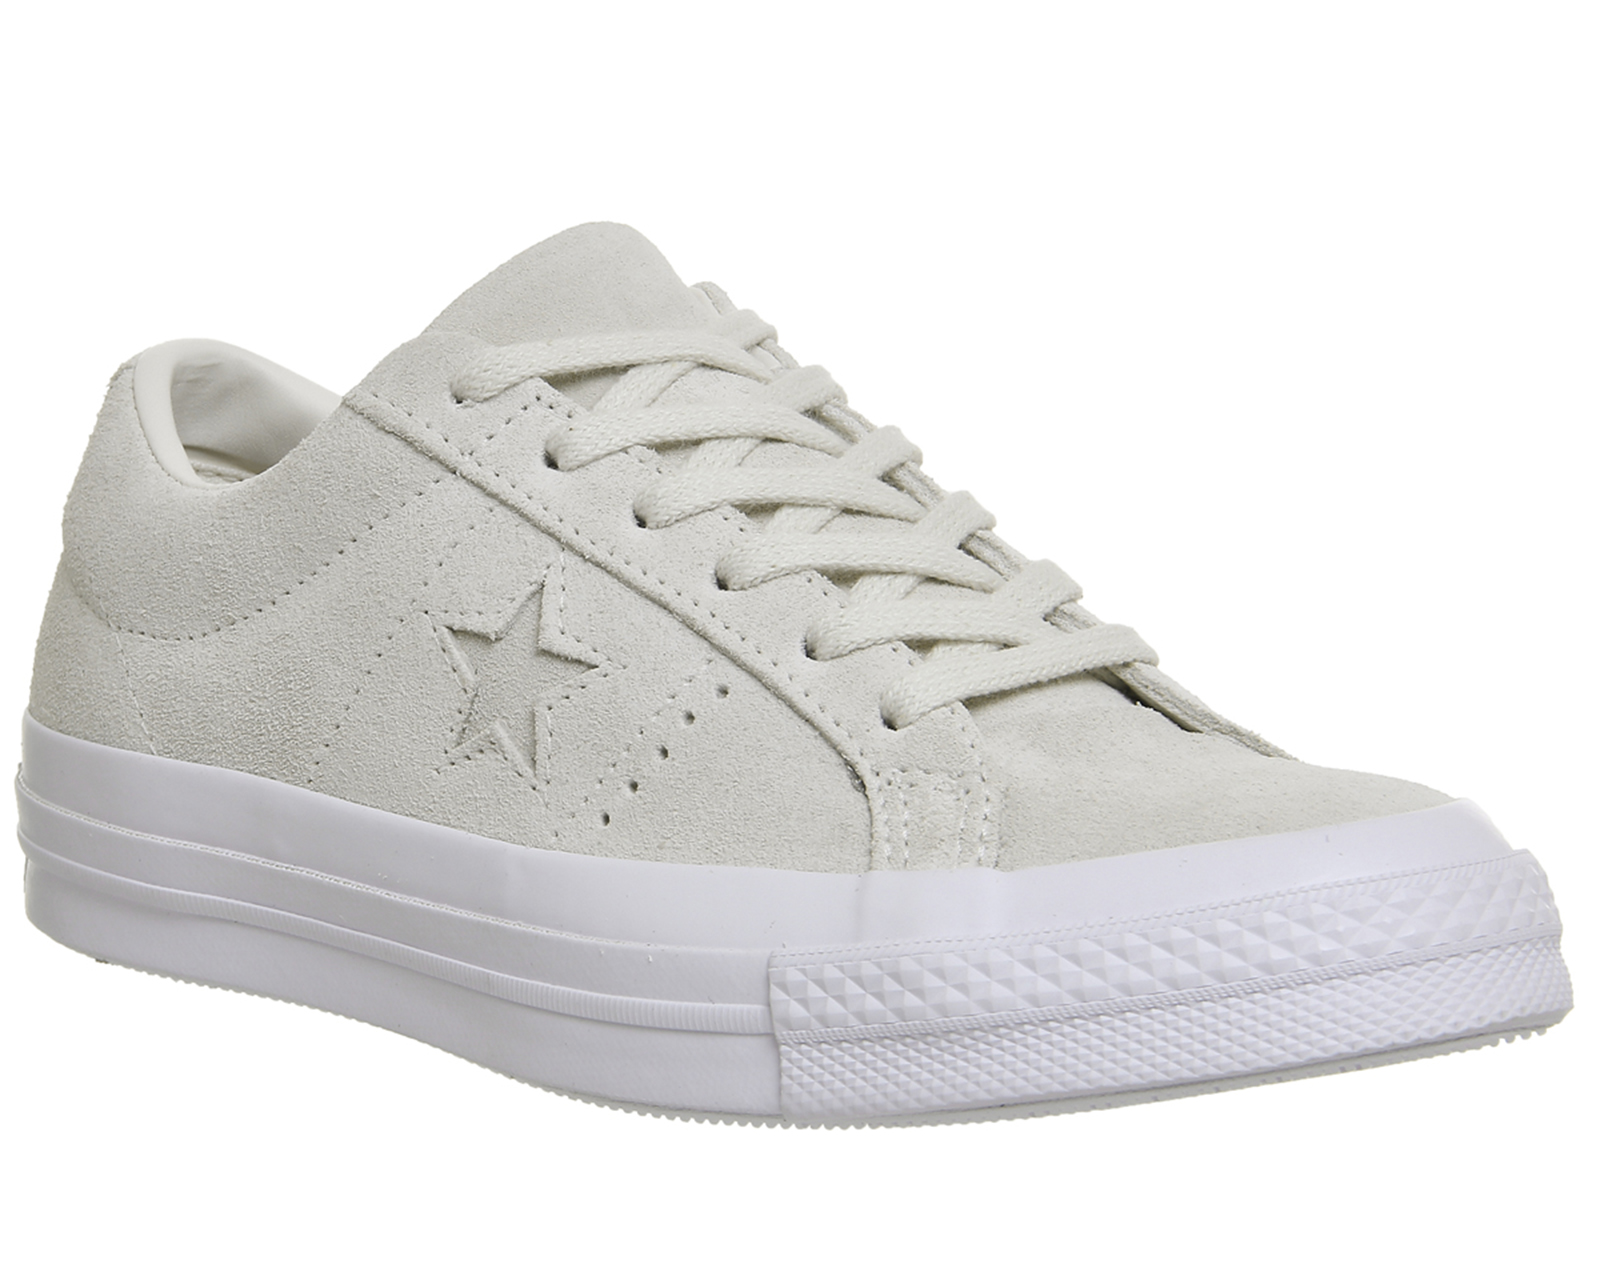 Converse One Star Egret White - Hers trainers